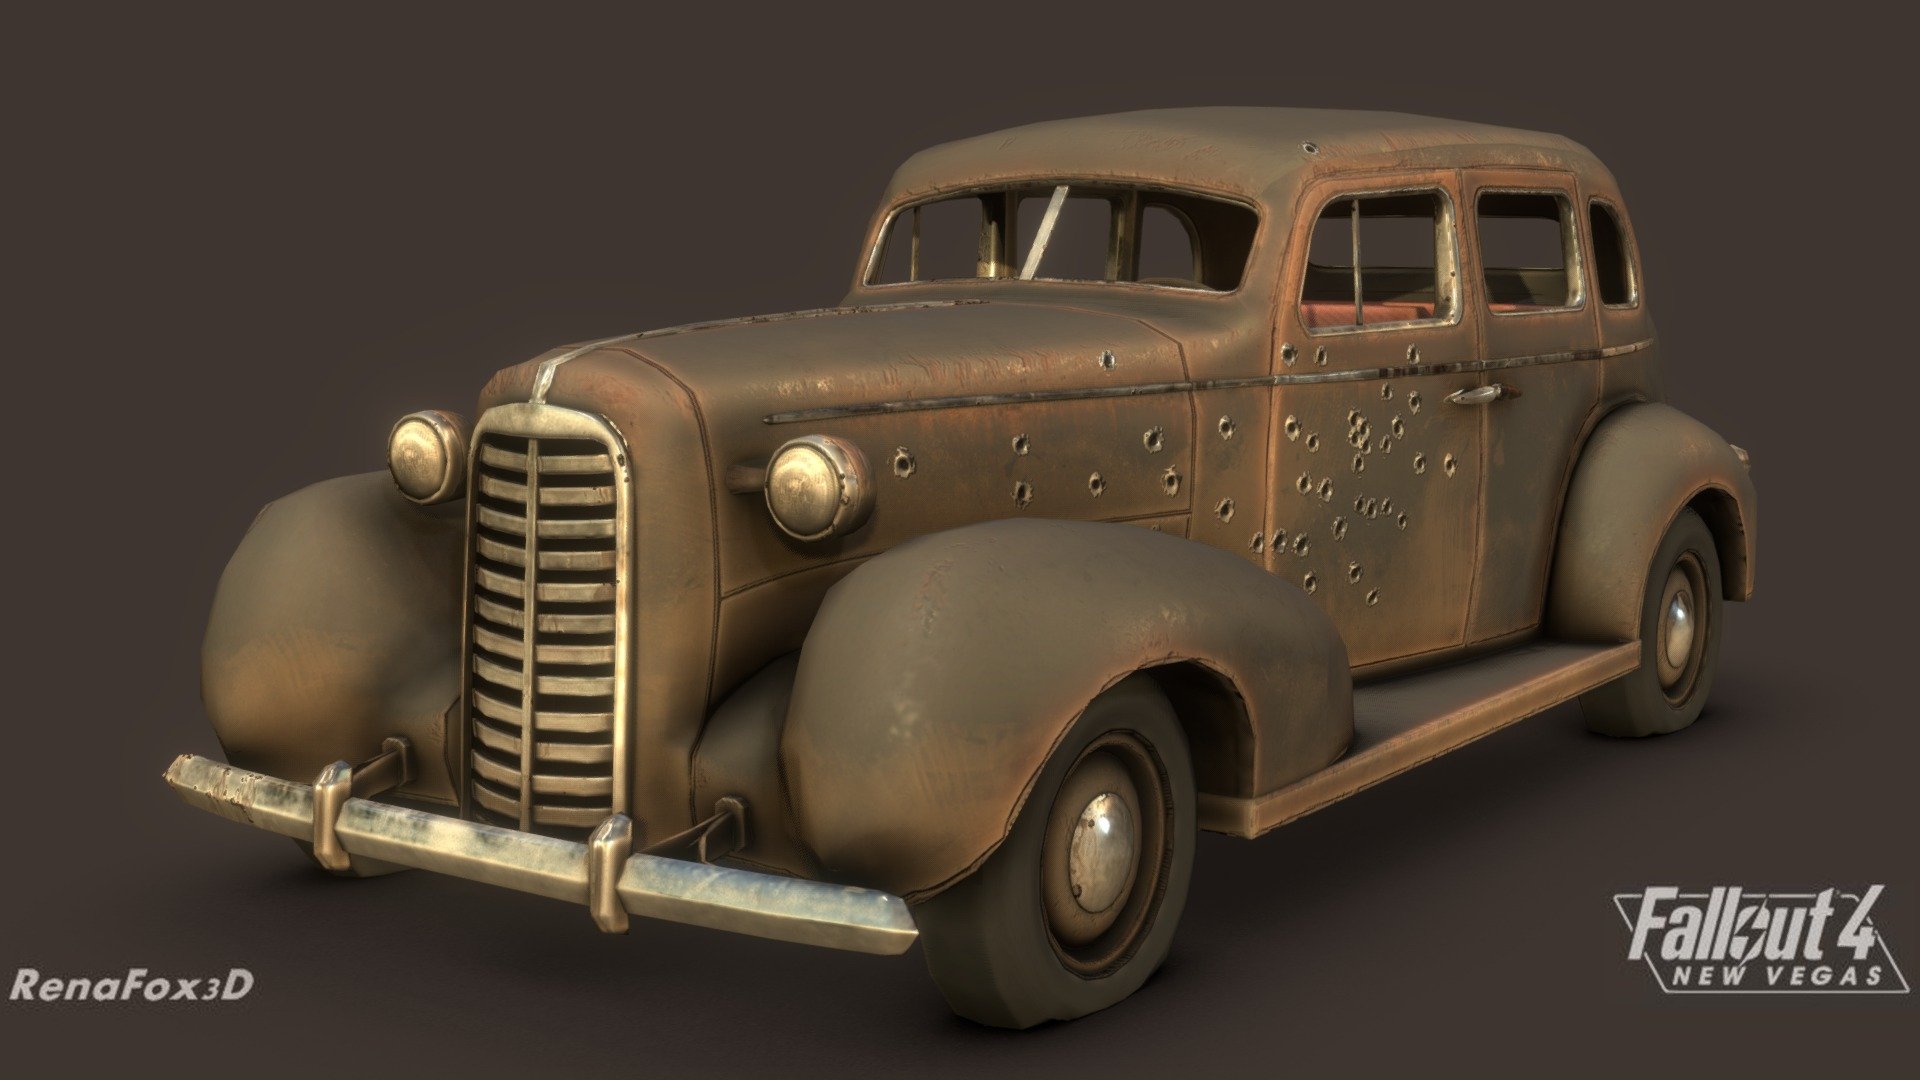 The death car of Vikki and Vance located at the casino of the same name in Primm. Made for the Fallout 4 New Vegas mod project.

Made in 3DSMax and Substance Painter - F4NV - Gangster Car - 3D model by Renafox (@kryik1023) 3d model